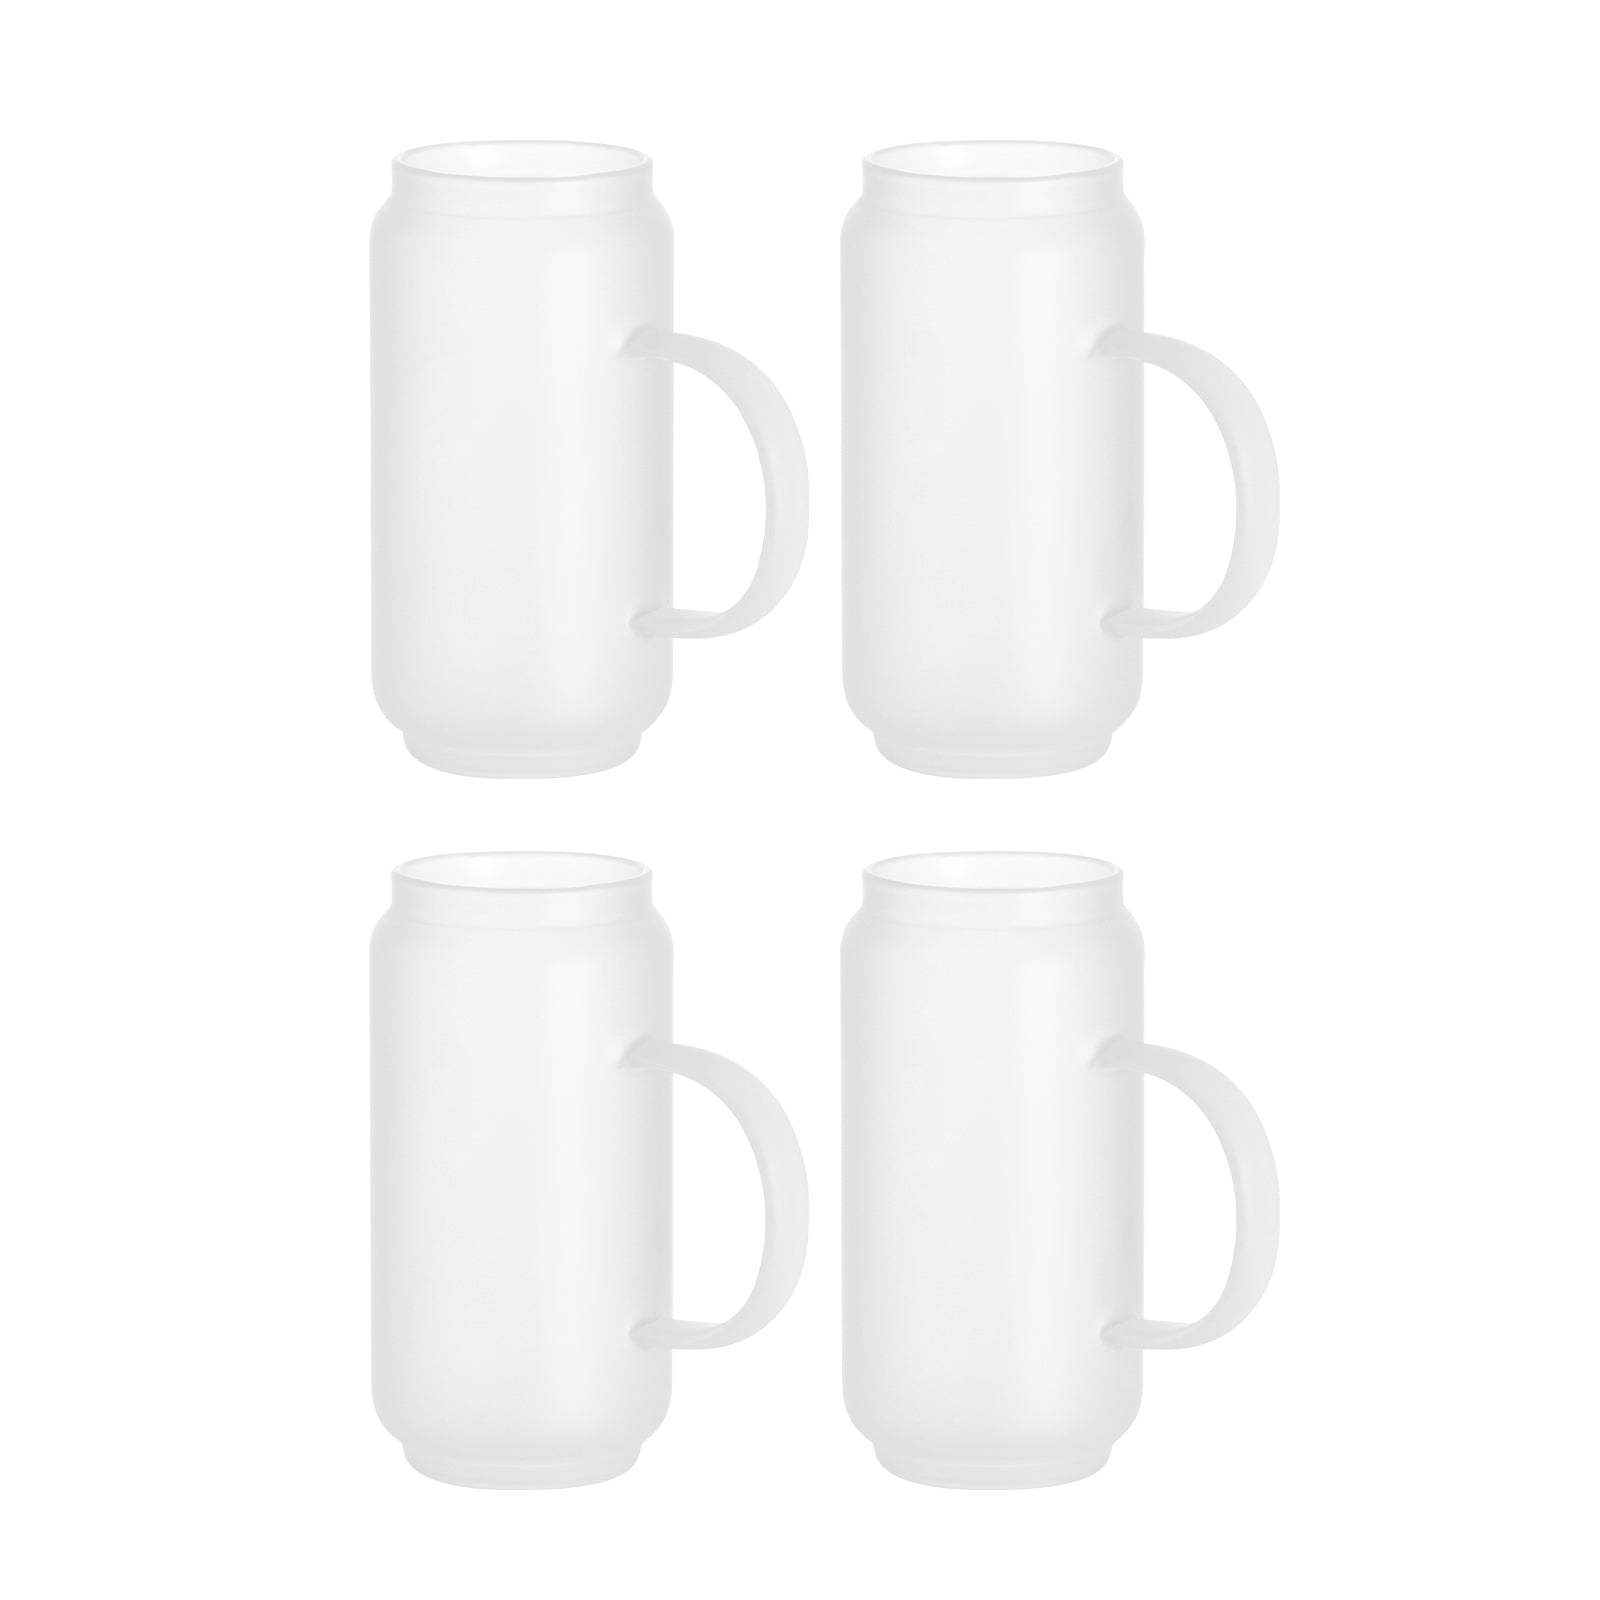  WUWEOT 6 Pack Sublimation Glass Cans, 18 Oz Frosted